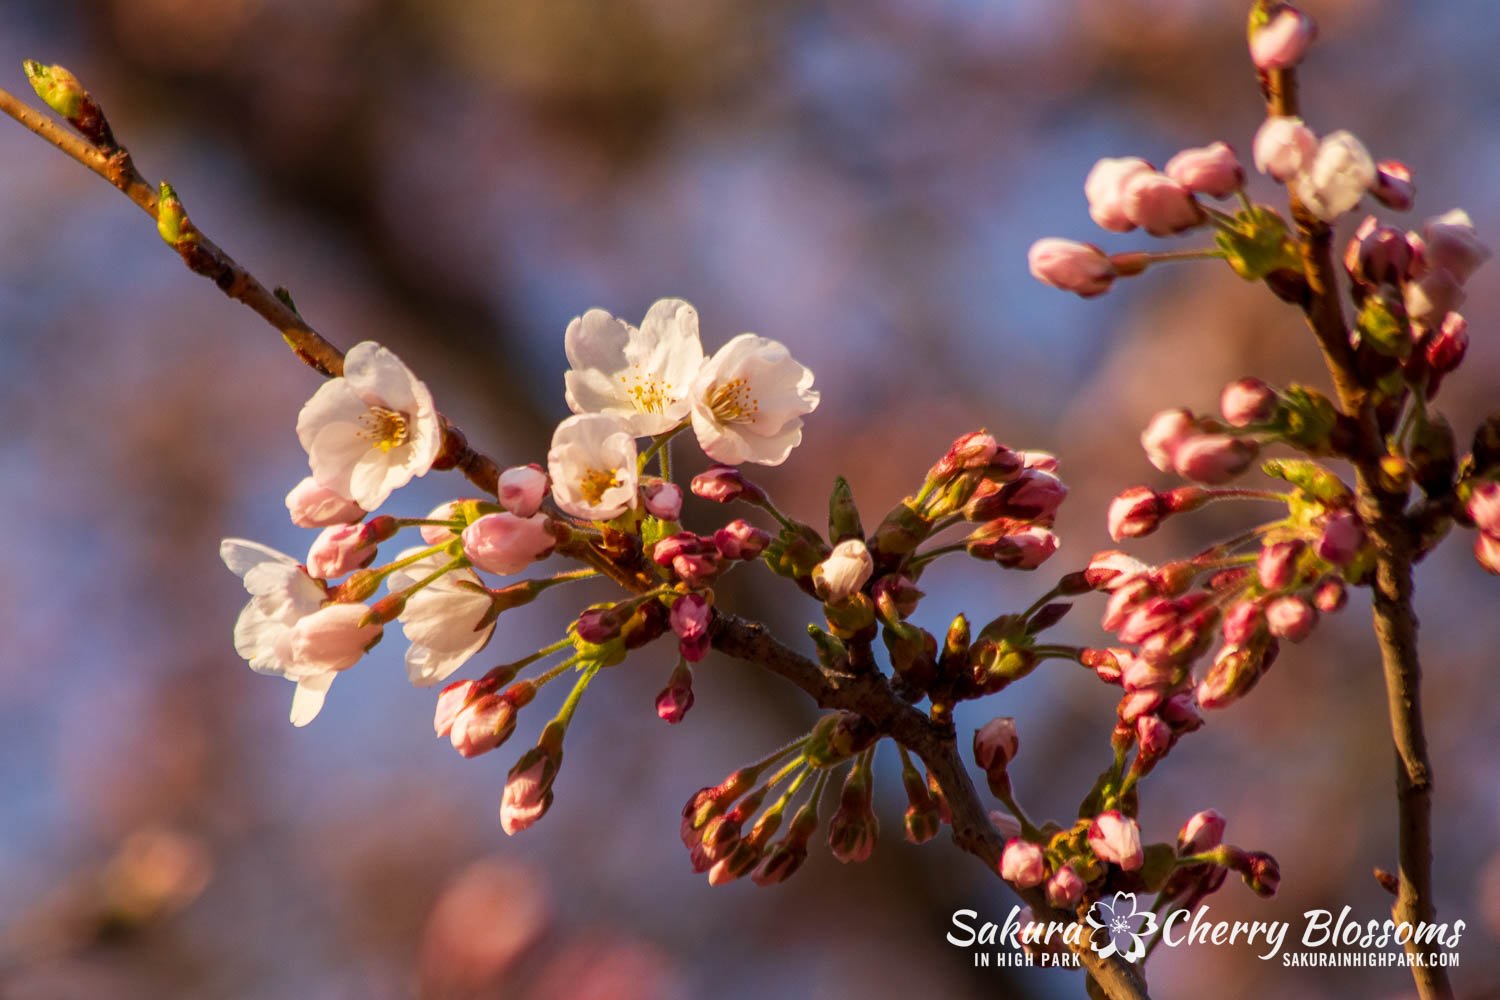 Sakura Watch April 16, 2024 - Peak bloom is close! Still, trees need better weather before putting on the High Park big show, as evidenced by the trees only showing less than 5% of open flowers today. Cold and rain will also slow any progress and pus